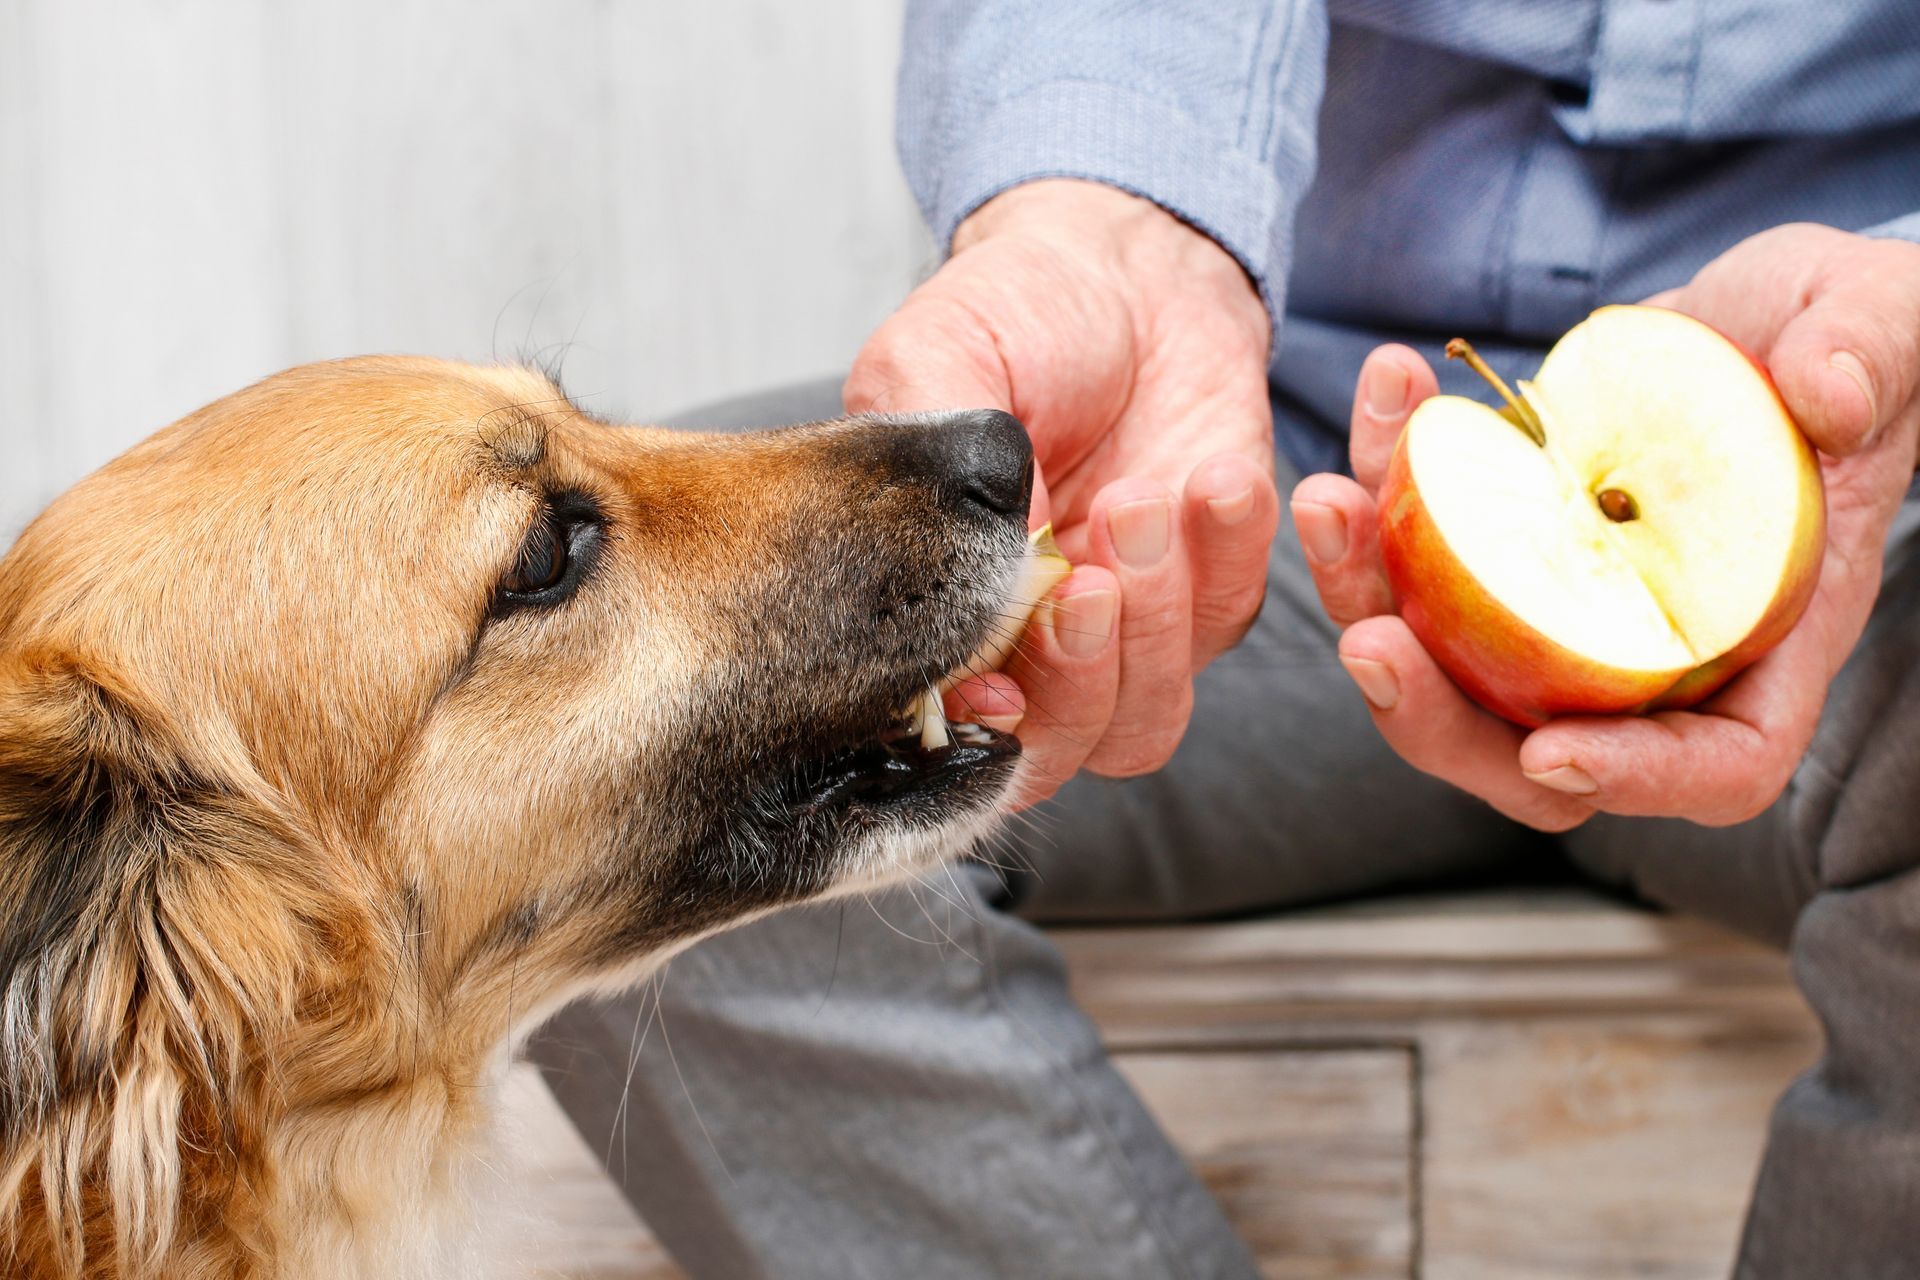 Knowing which fruits are safe for dogs is one of the main challenges for a pet owner